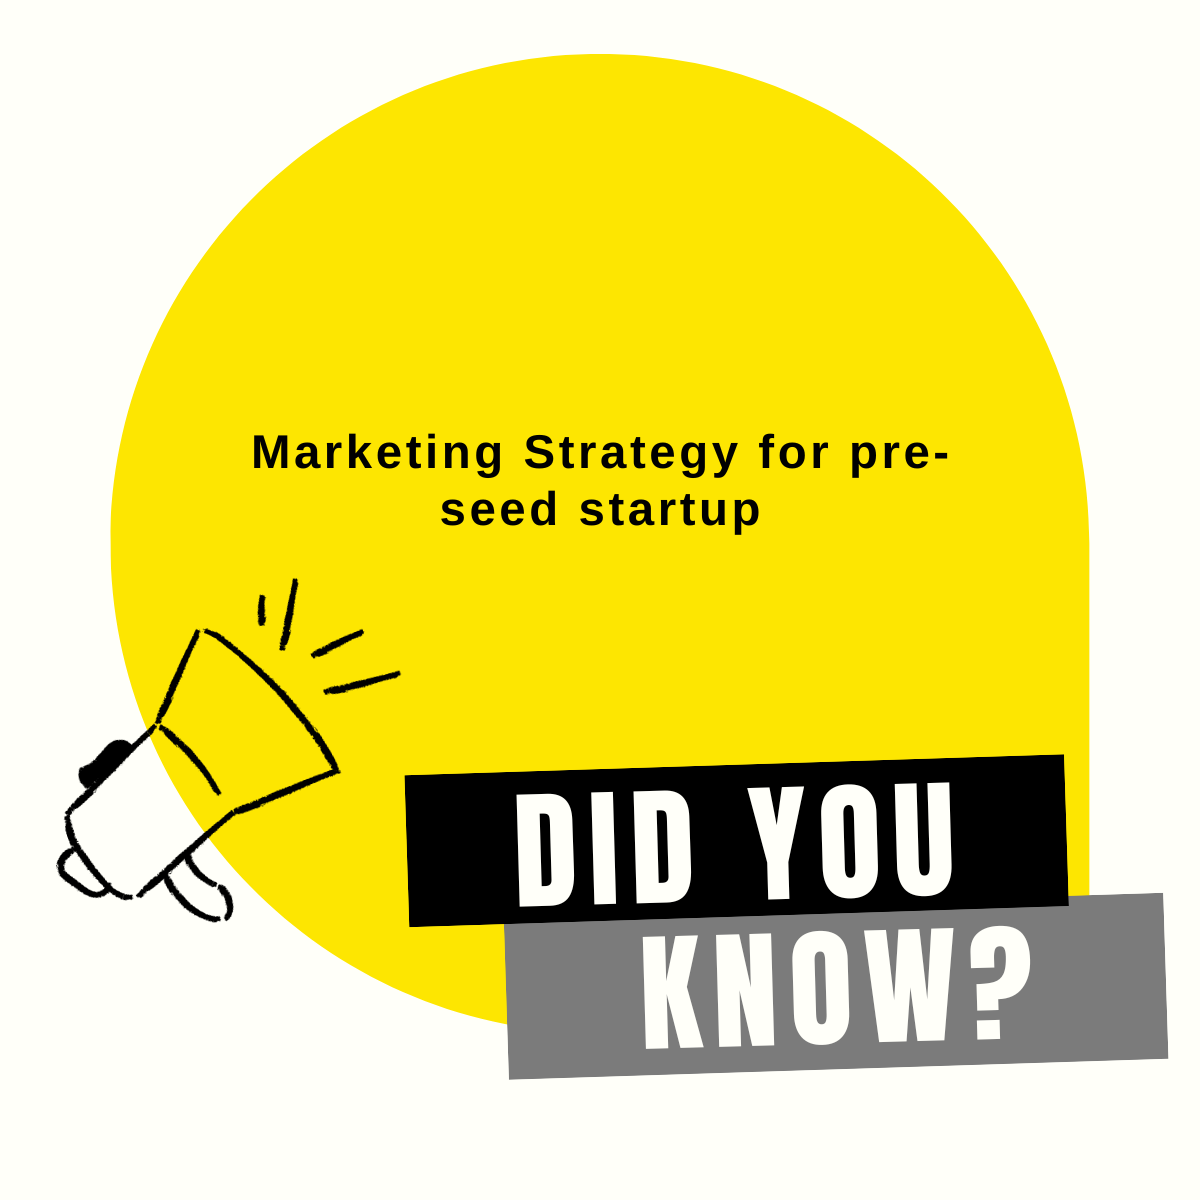 Marketing strategy for pre-seed startups